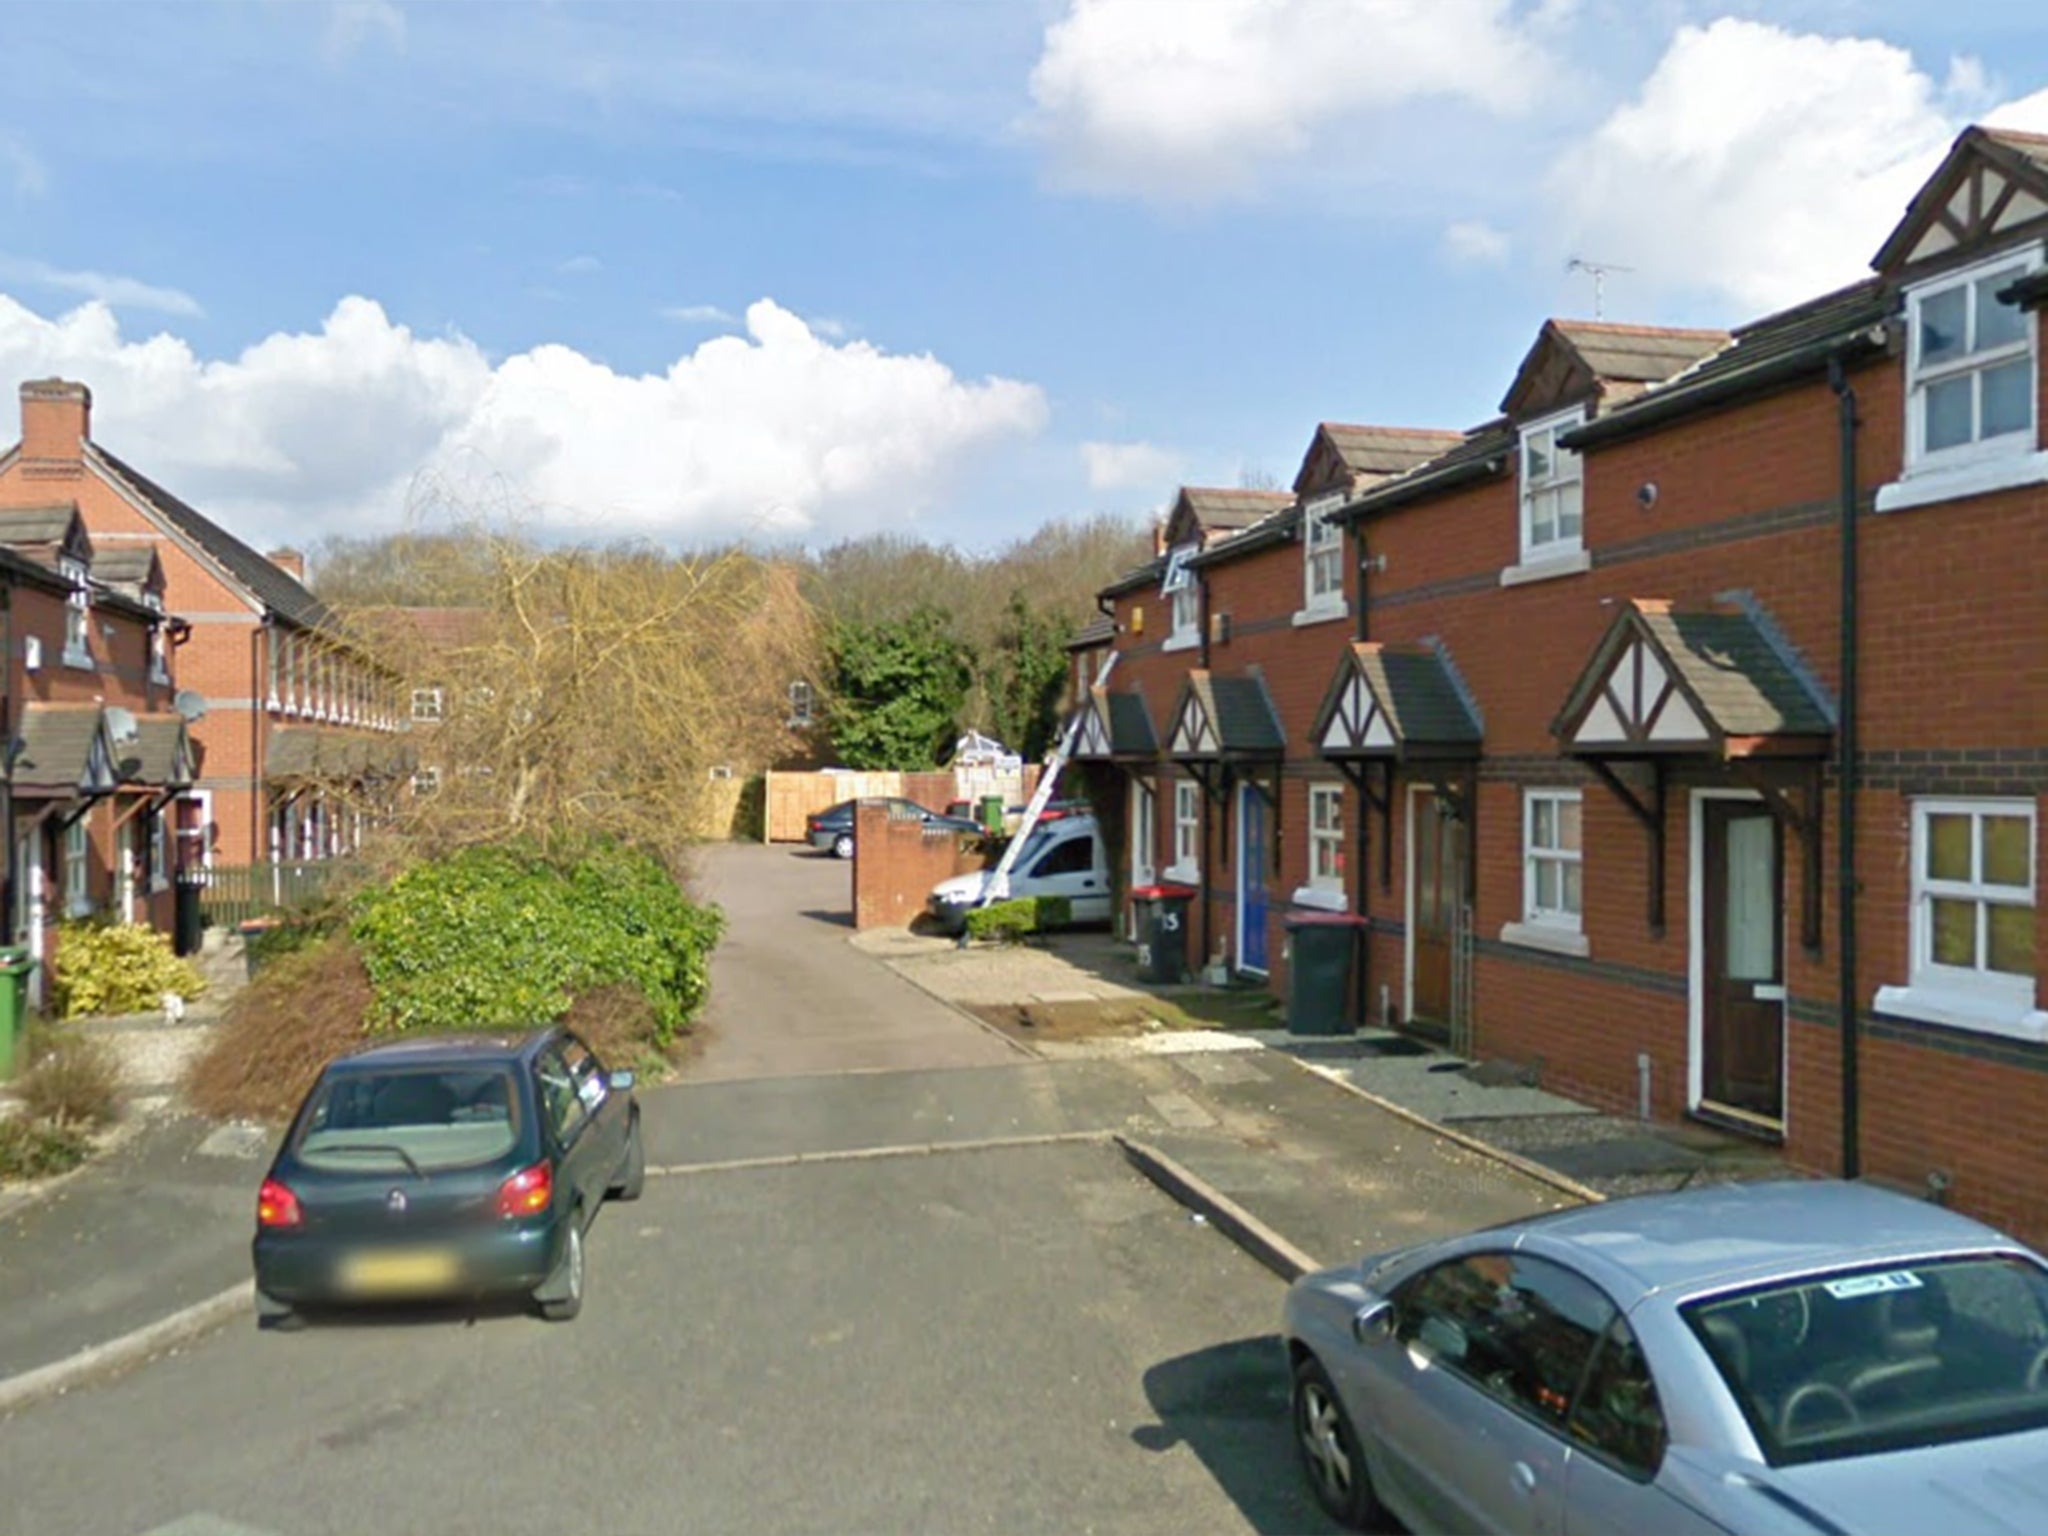 A man died following an incident off Stonebridge Close in Telford